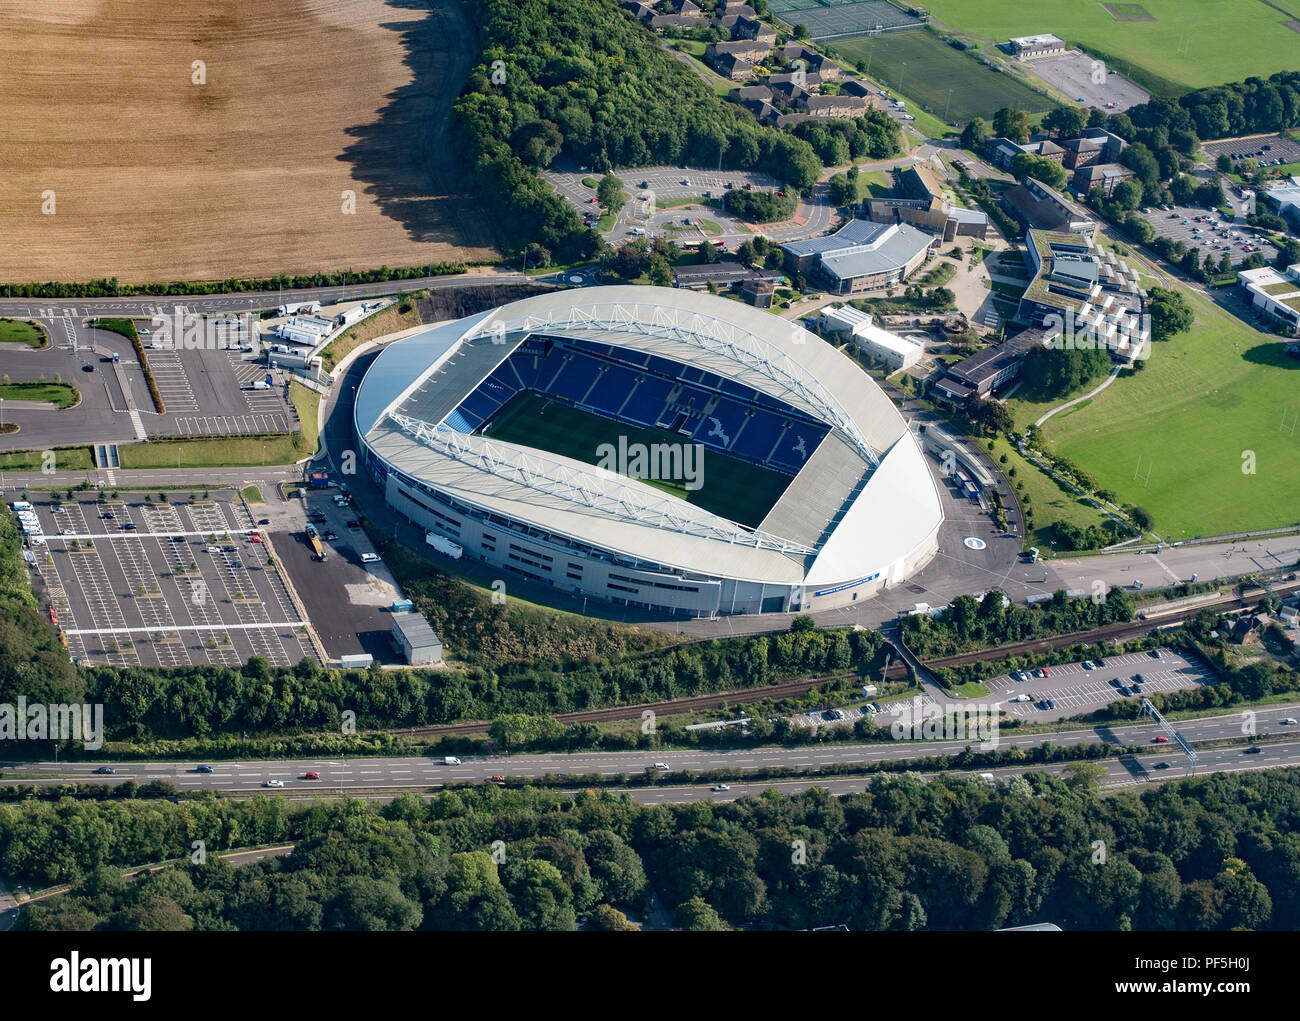 Amex Stadium from the air Stock Photo